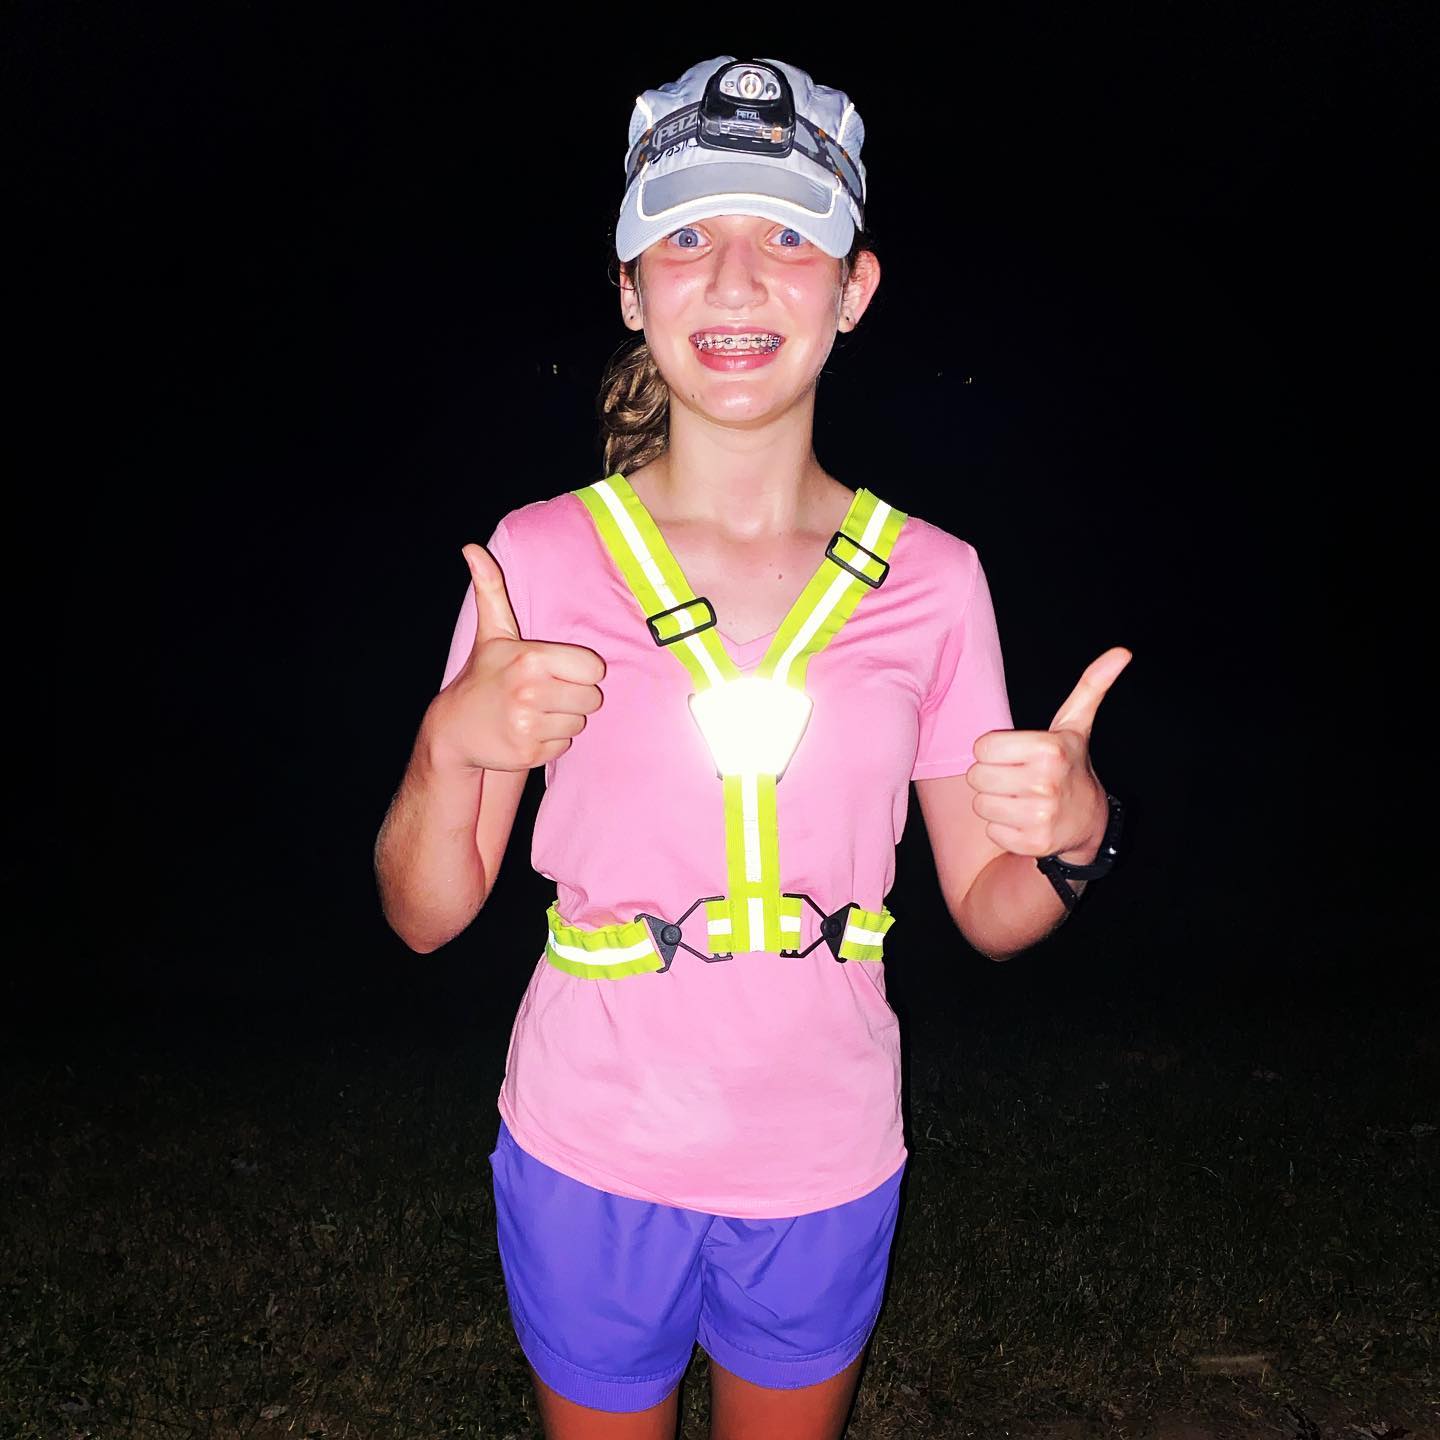 So what do you do when your training plan calls for a 30 minute run but your schedule is packed from morning until night? You slap on a headlamp and a reflective vest at 8:30pm and you get it done! This girl is working hard! #family #running